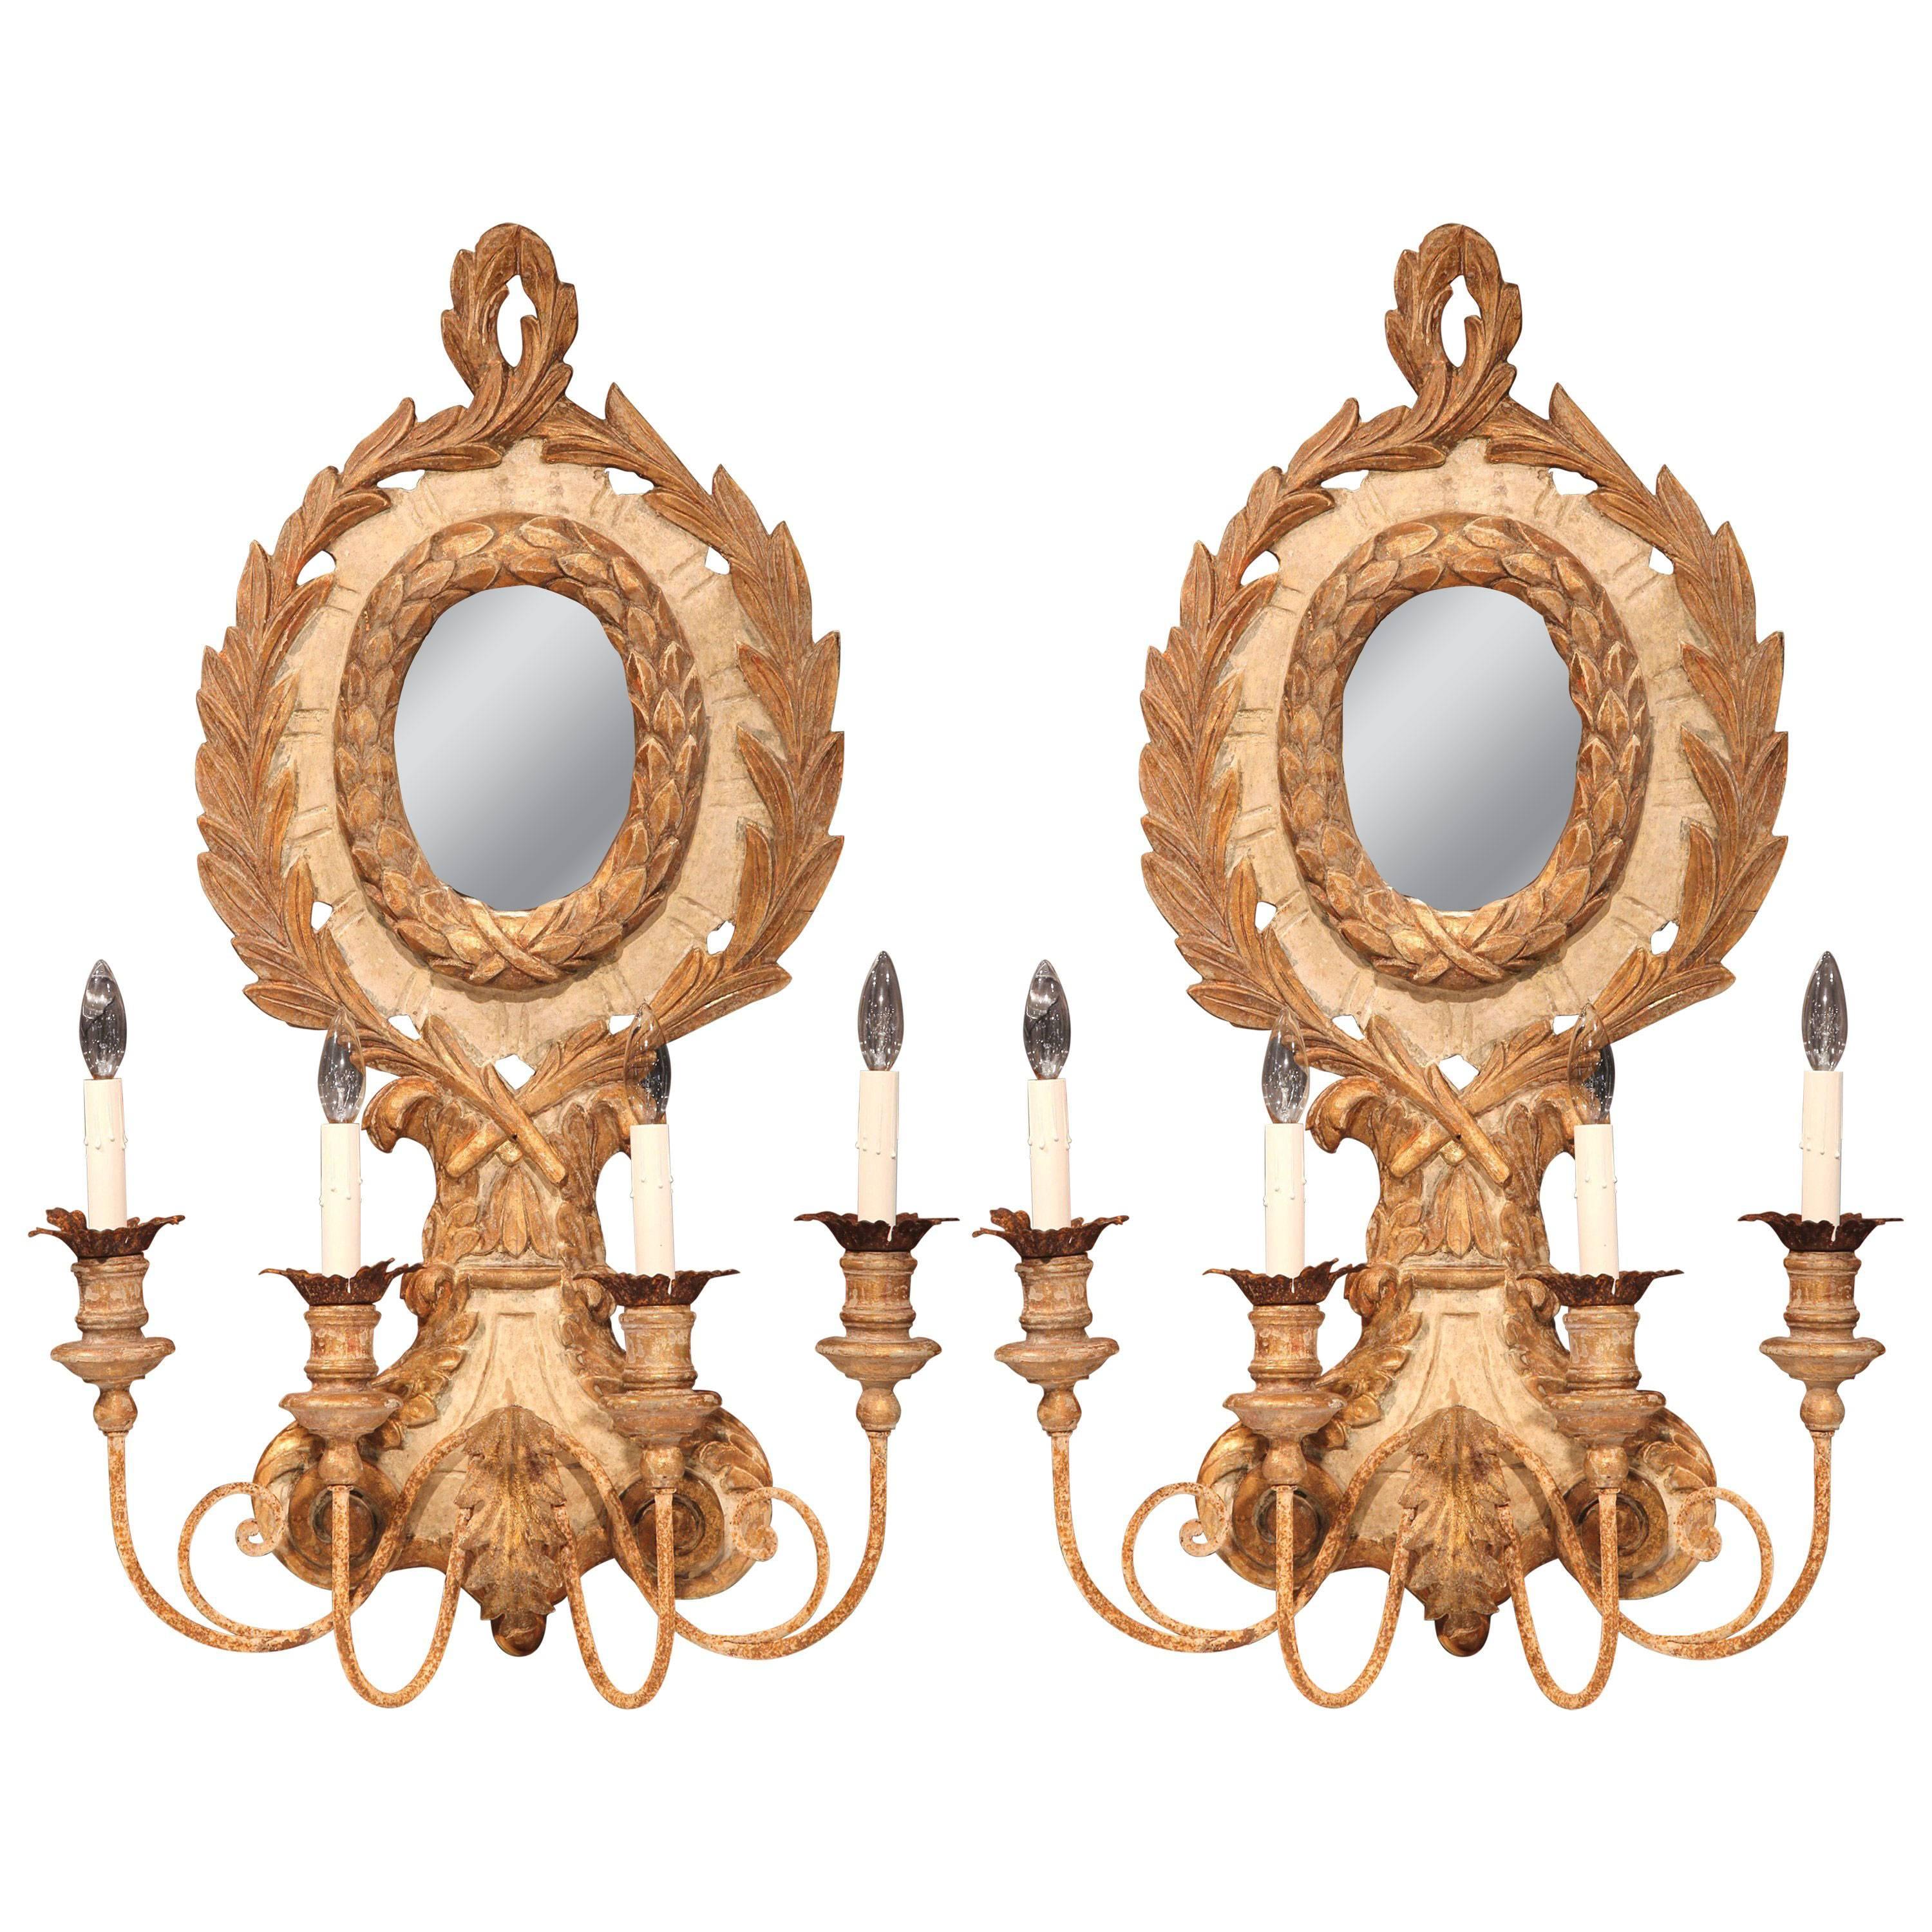 Pair of Italian Carved Giltwood and Iron Painted Four-Light Sconces